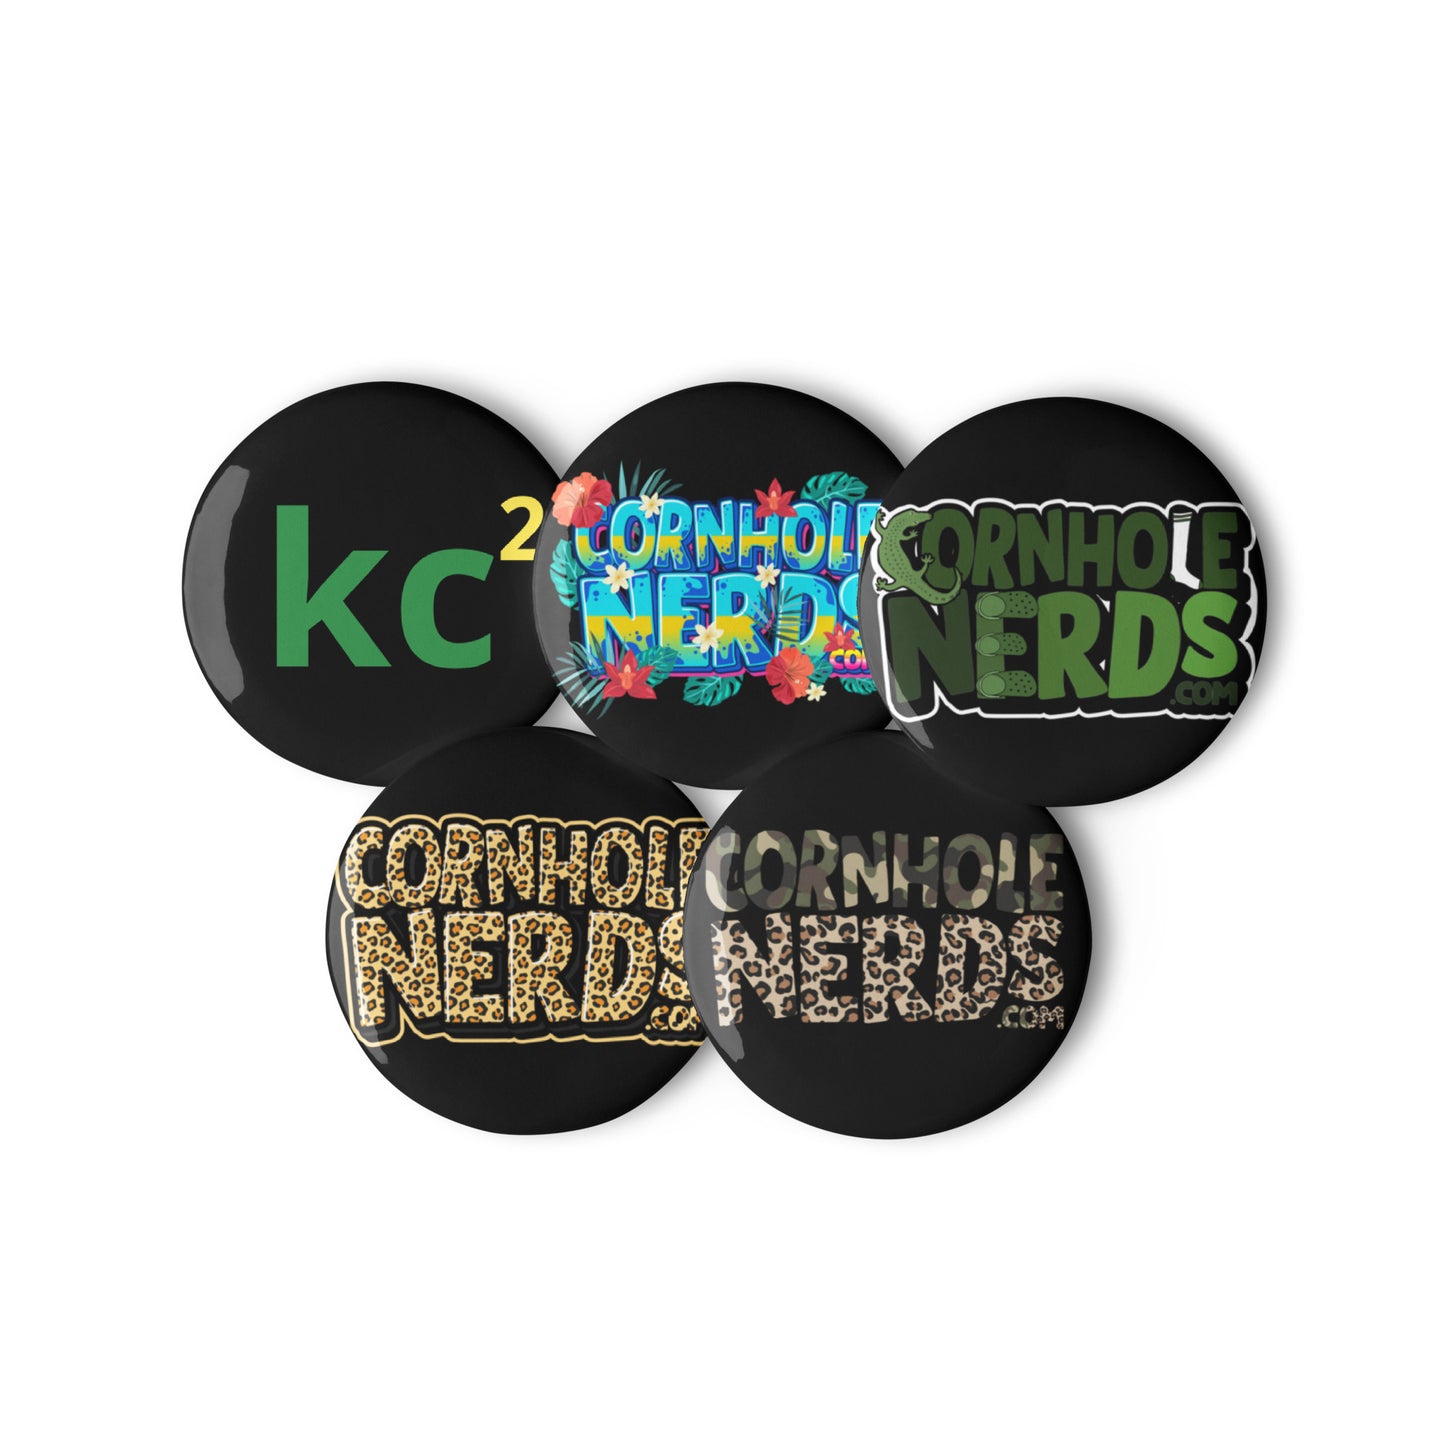 Kasey Squared set of pin buttons